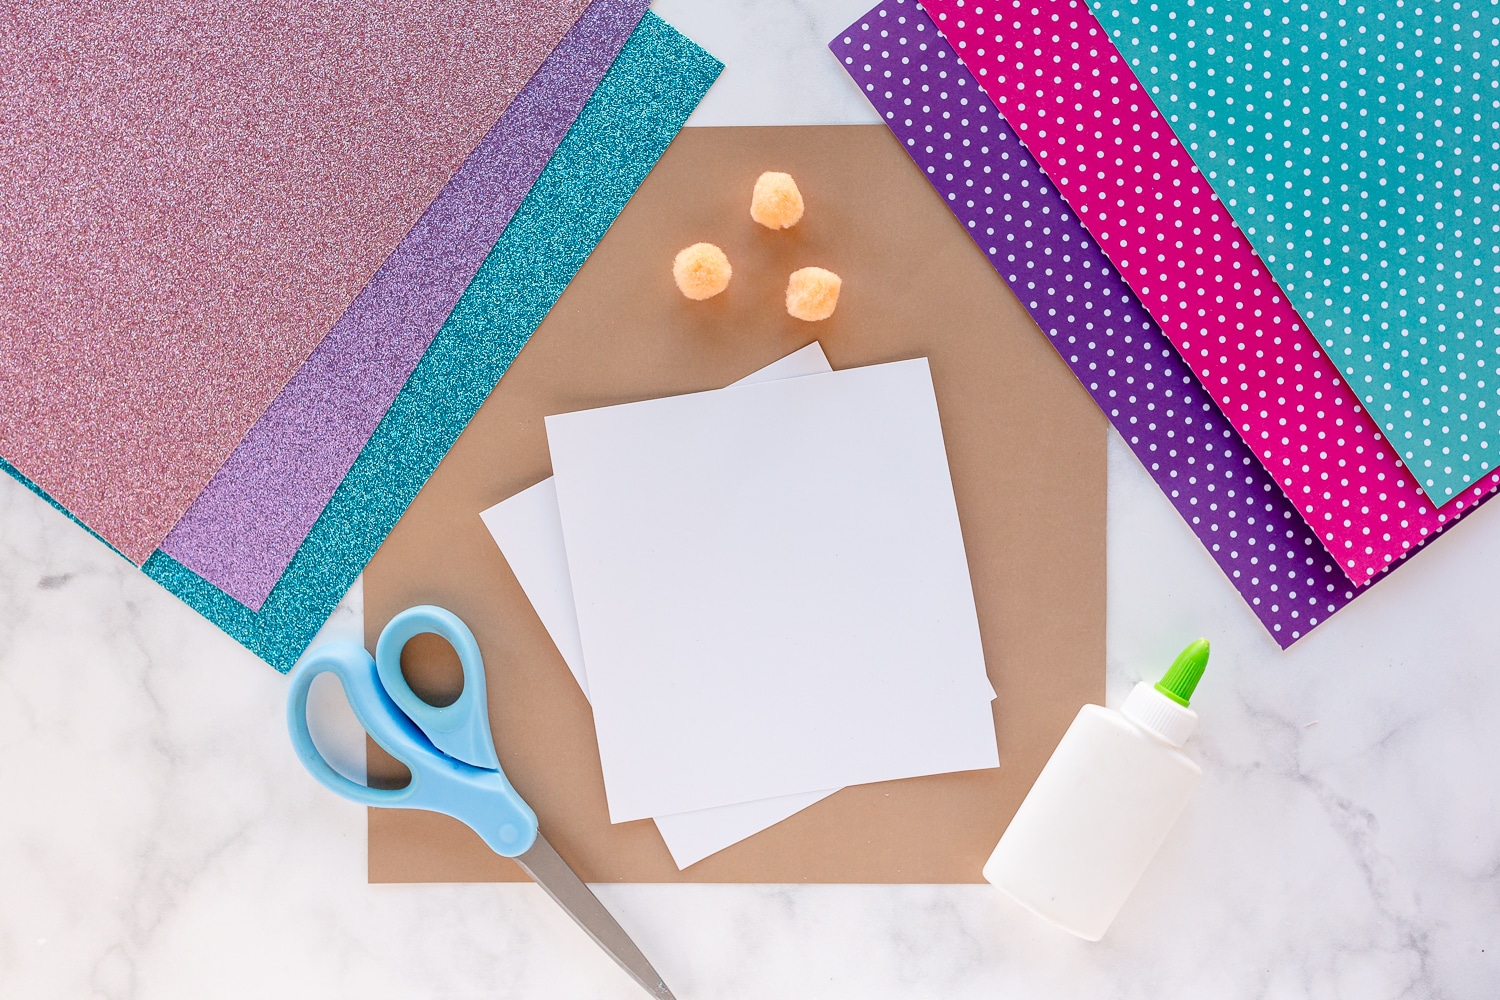 supplies needed for gnomes: cardstock, glitter paper, pom poms